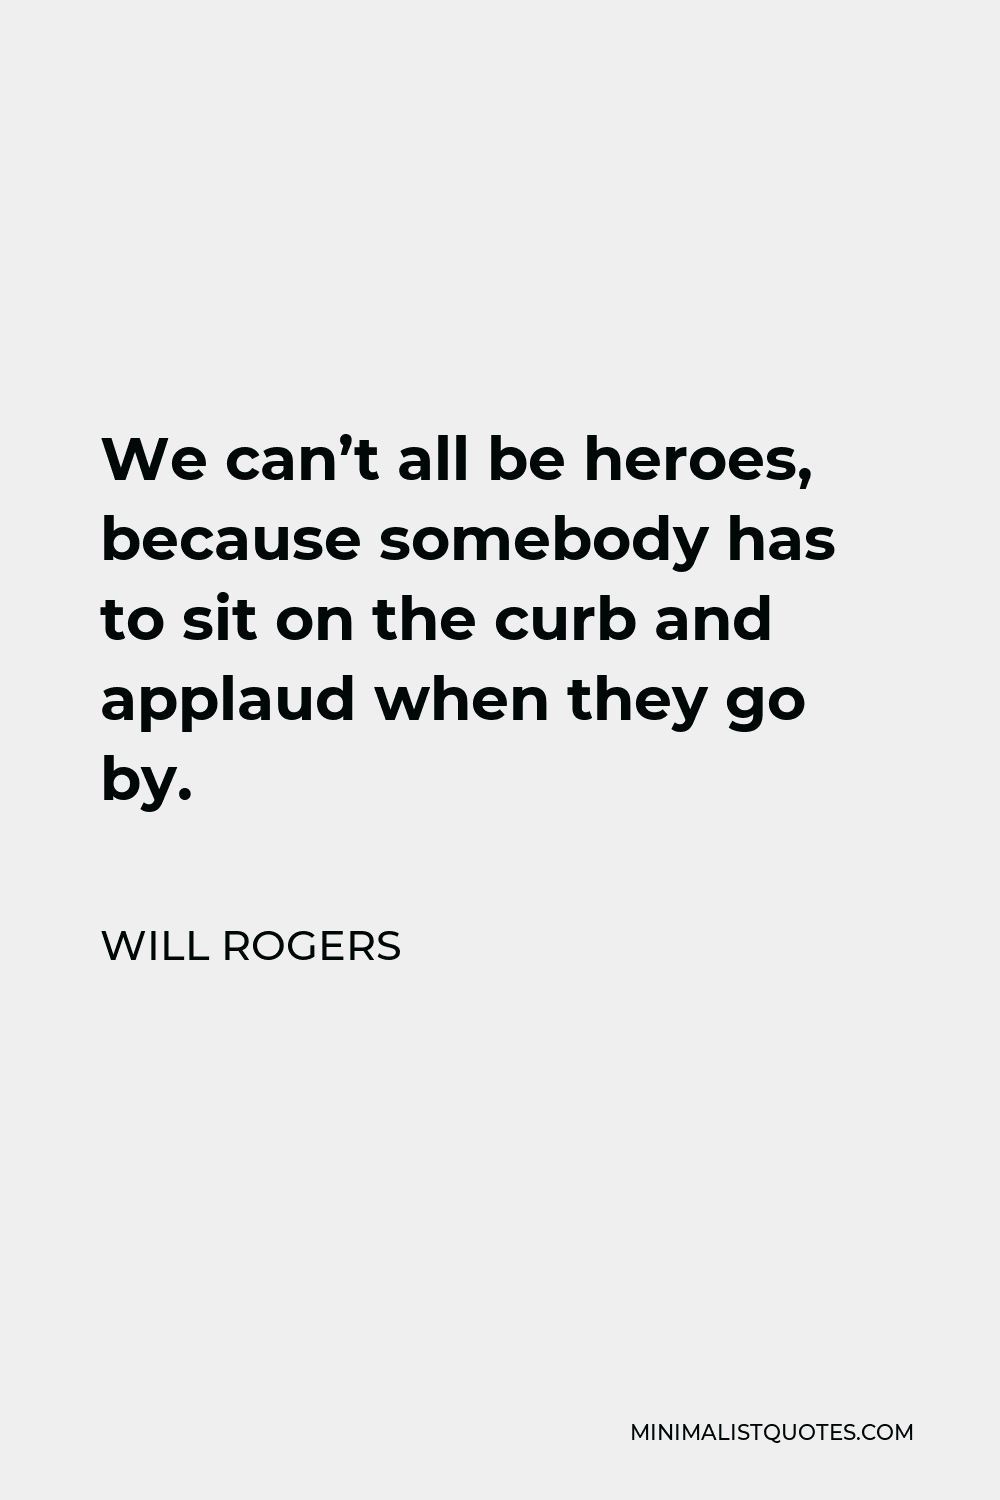 Will Rogers Quote - We can’t all be heroes, because somebody has to sit on the curb and applaud when they go by.